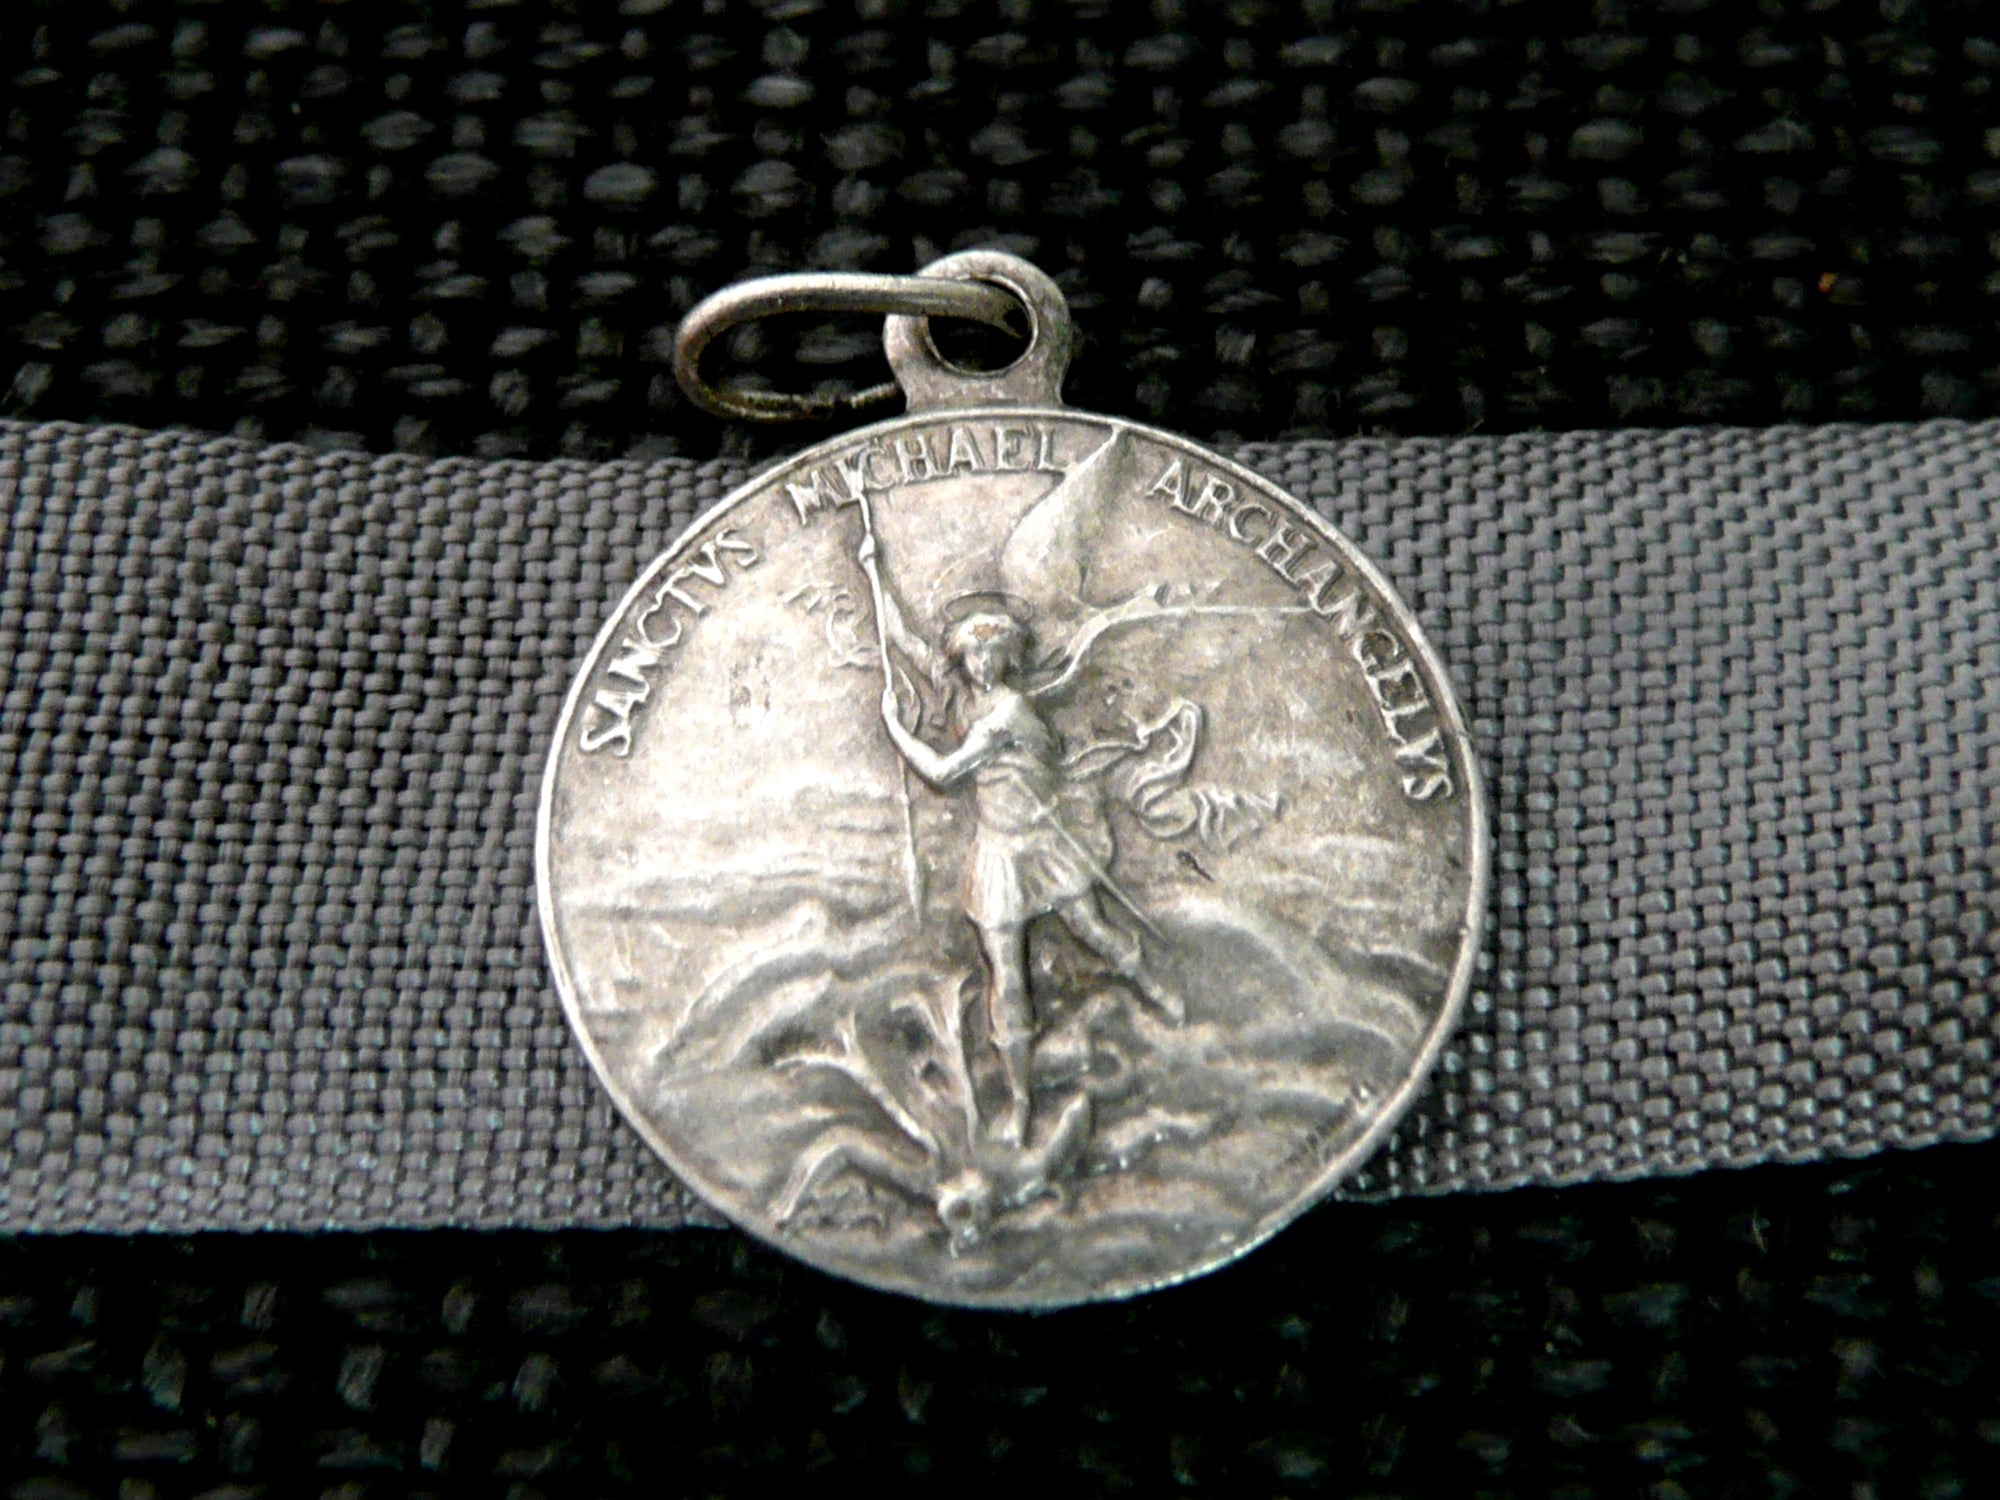 Small Vintage French Saint Michael Medal